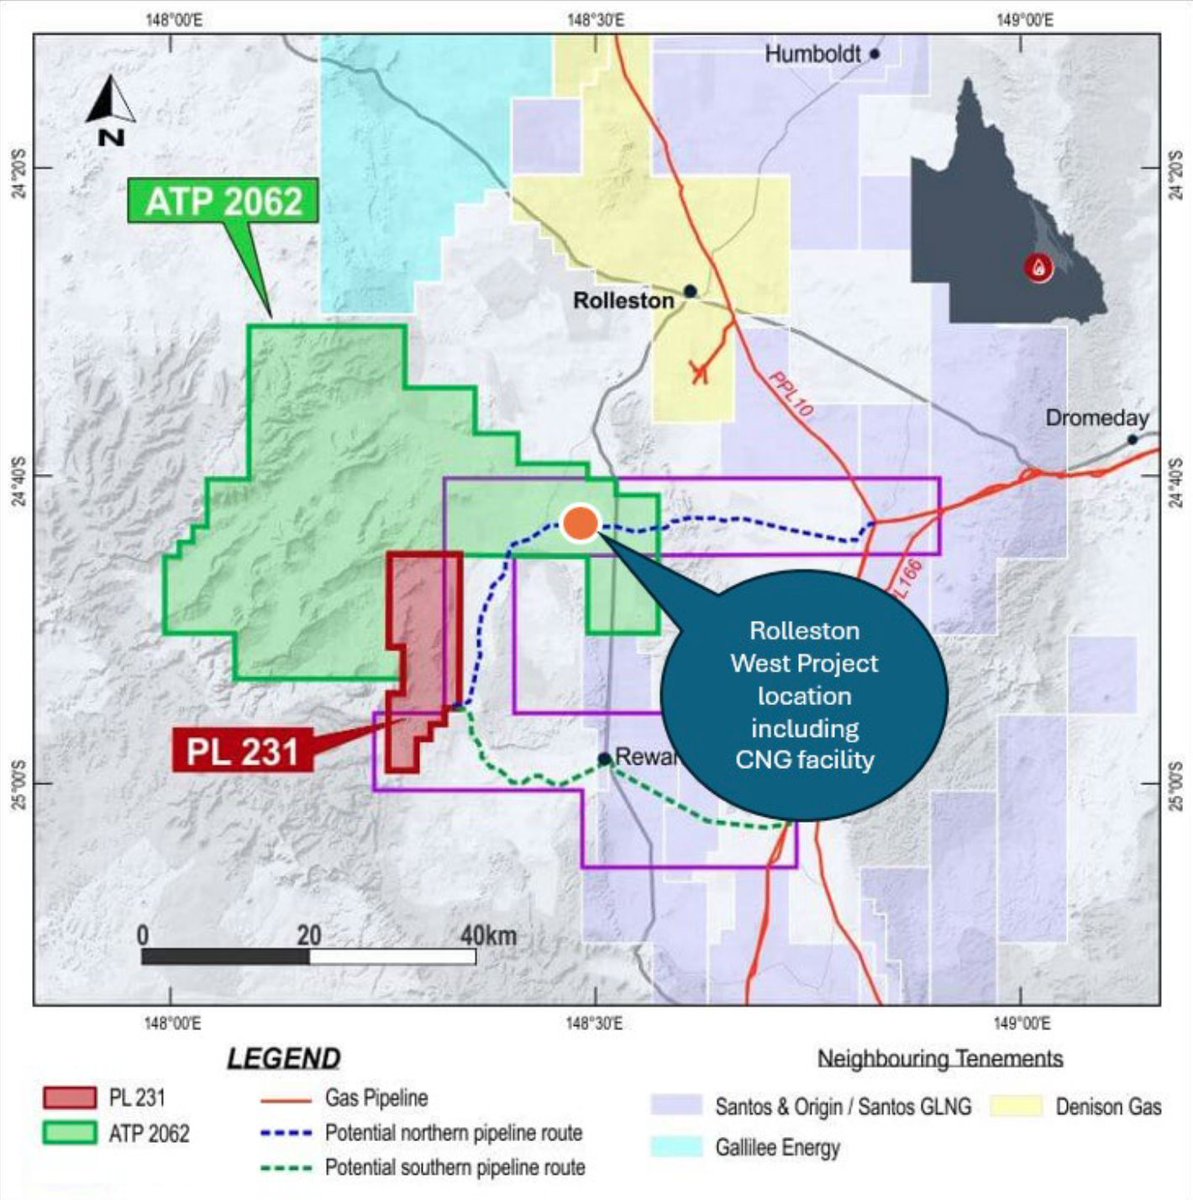 $GAS State Gas rewarded a $5.5 million exploration grant, allowing for further delineation of gas resources and reserves within the company’s Rolleston West coal seam gas Project in QLD 🇦🇺⛽️ #ASX #ASXNews #Investing #Markets #Mining #Exploration #Gas